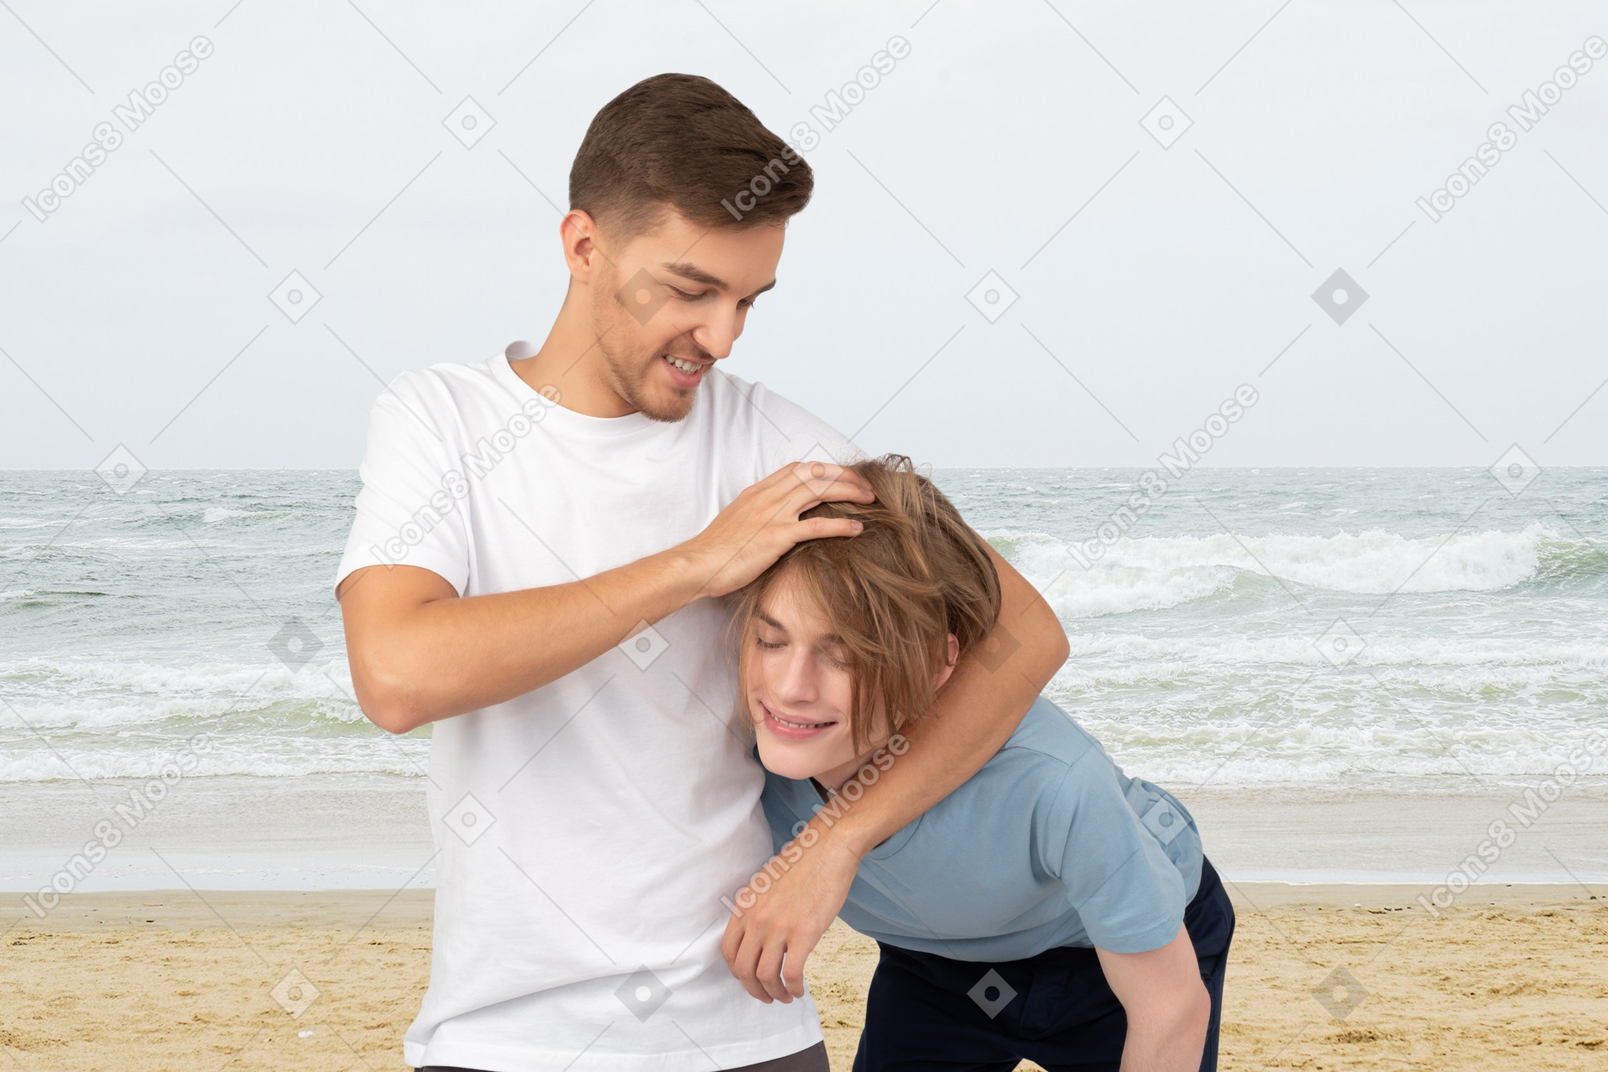 A man messing up a woman's hair on the beach